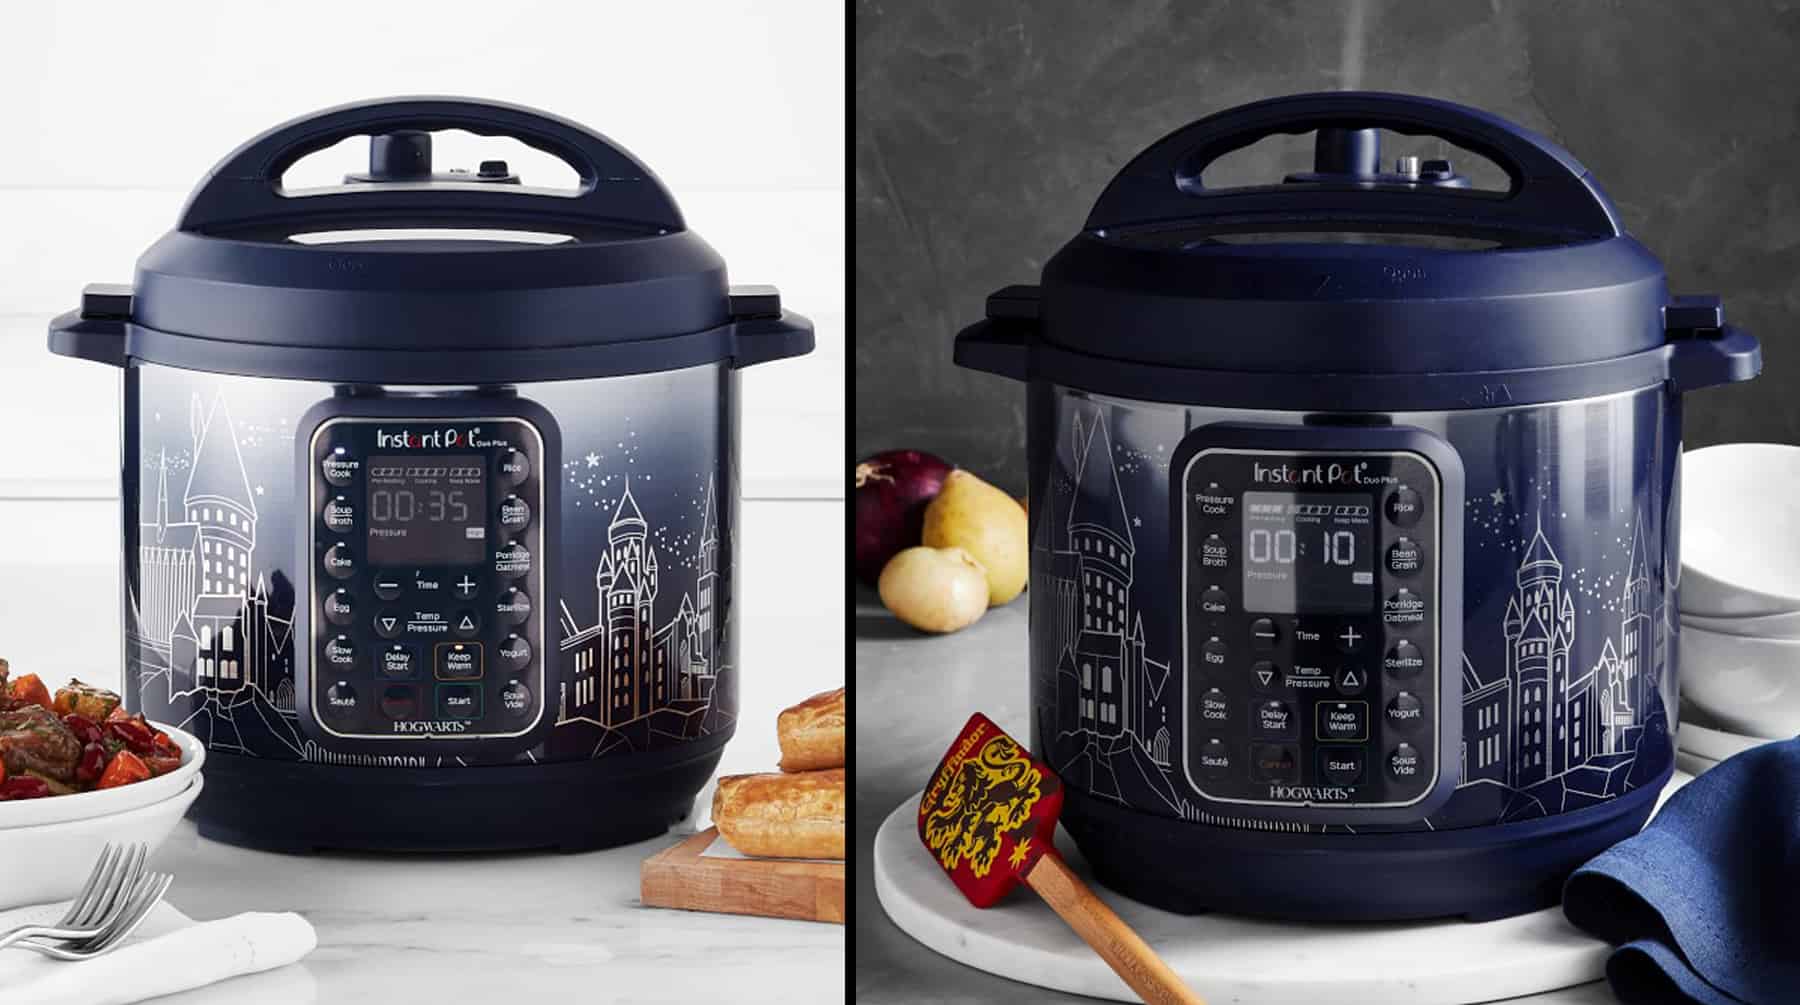 Instant Pot launches the R2-D2 Star Wars Multi Pressure Cooker